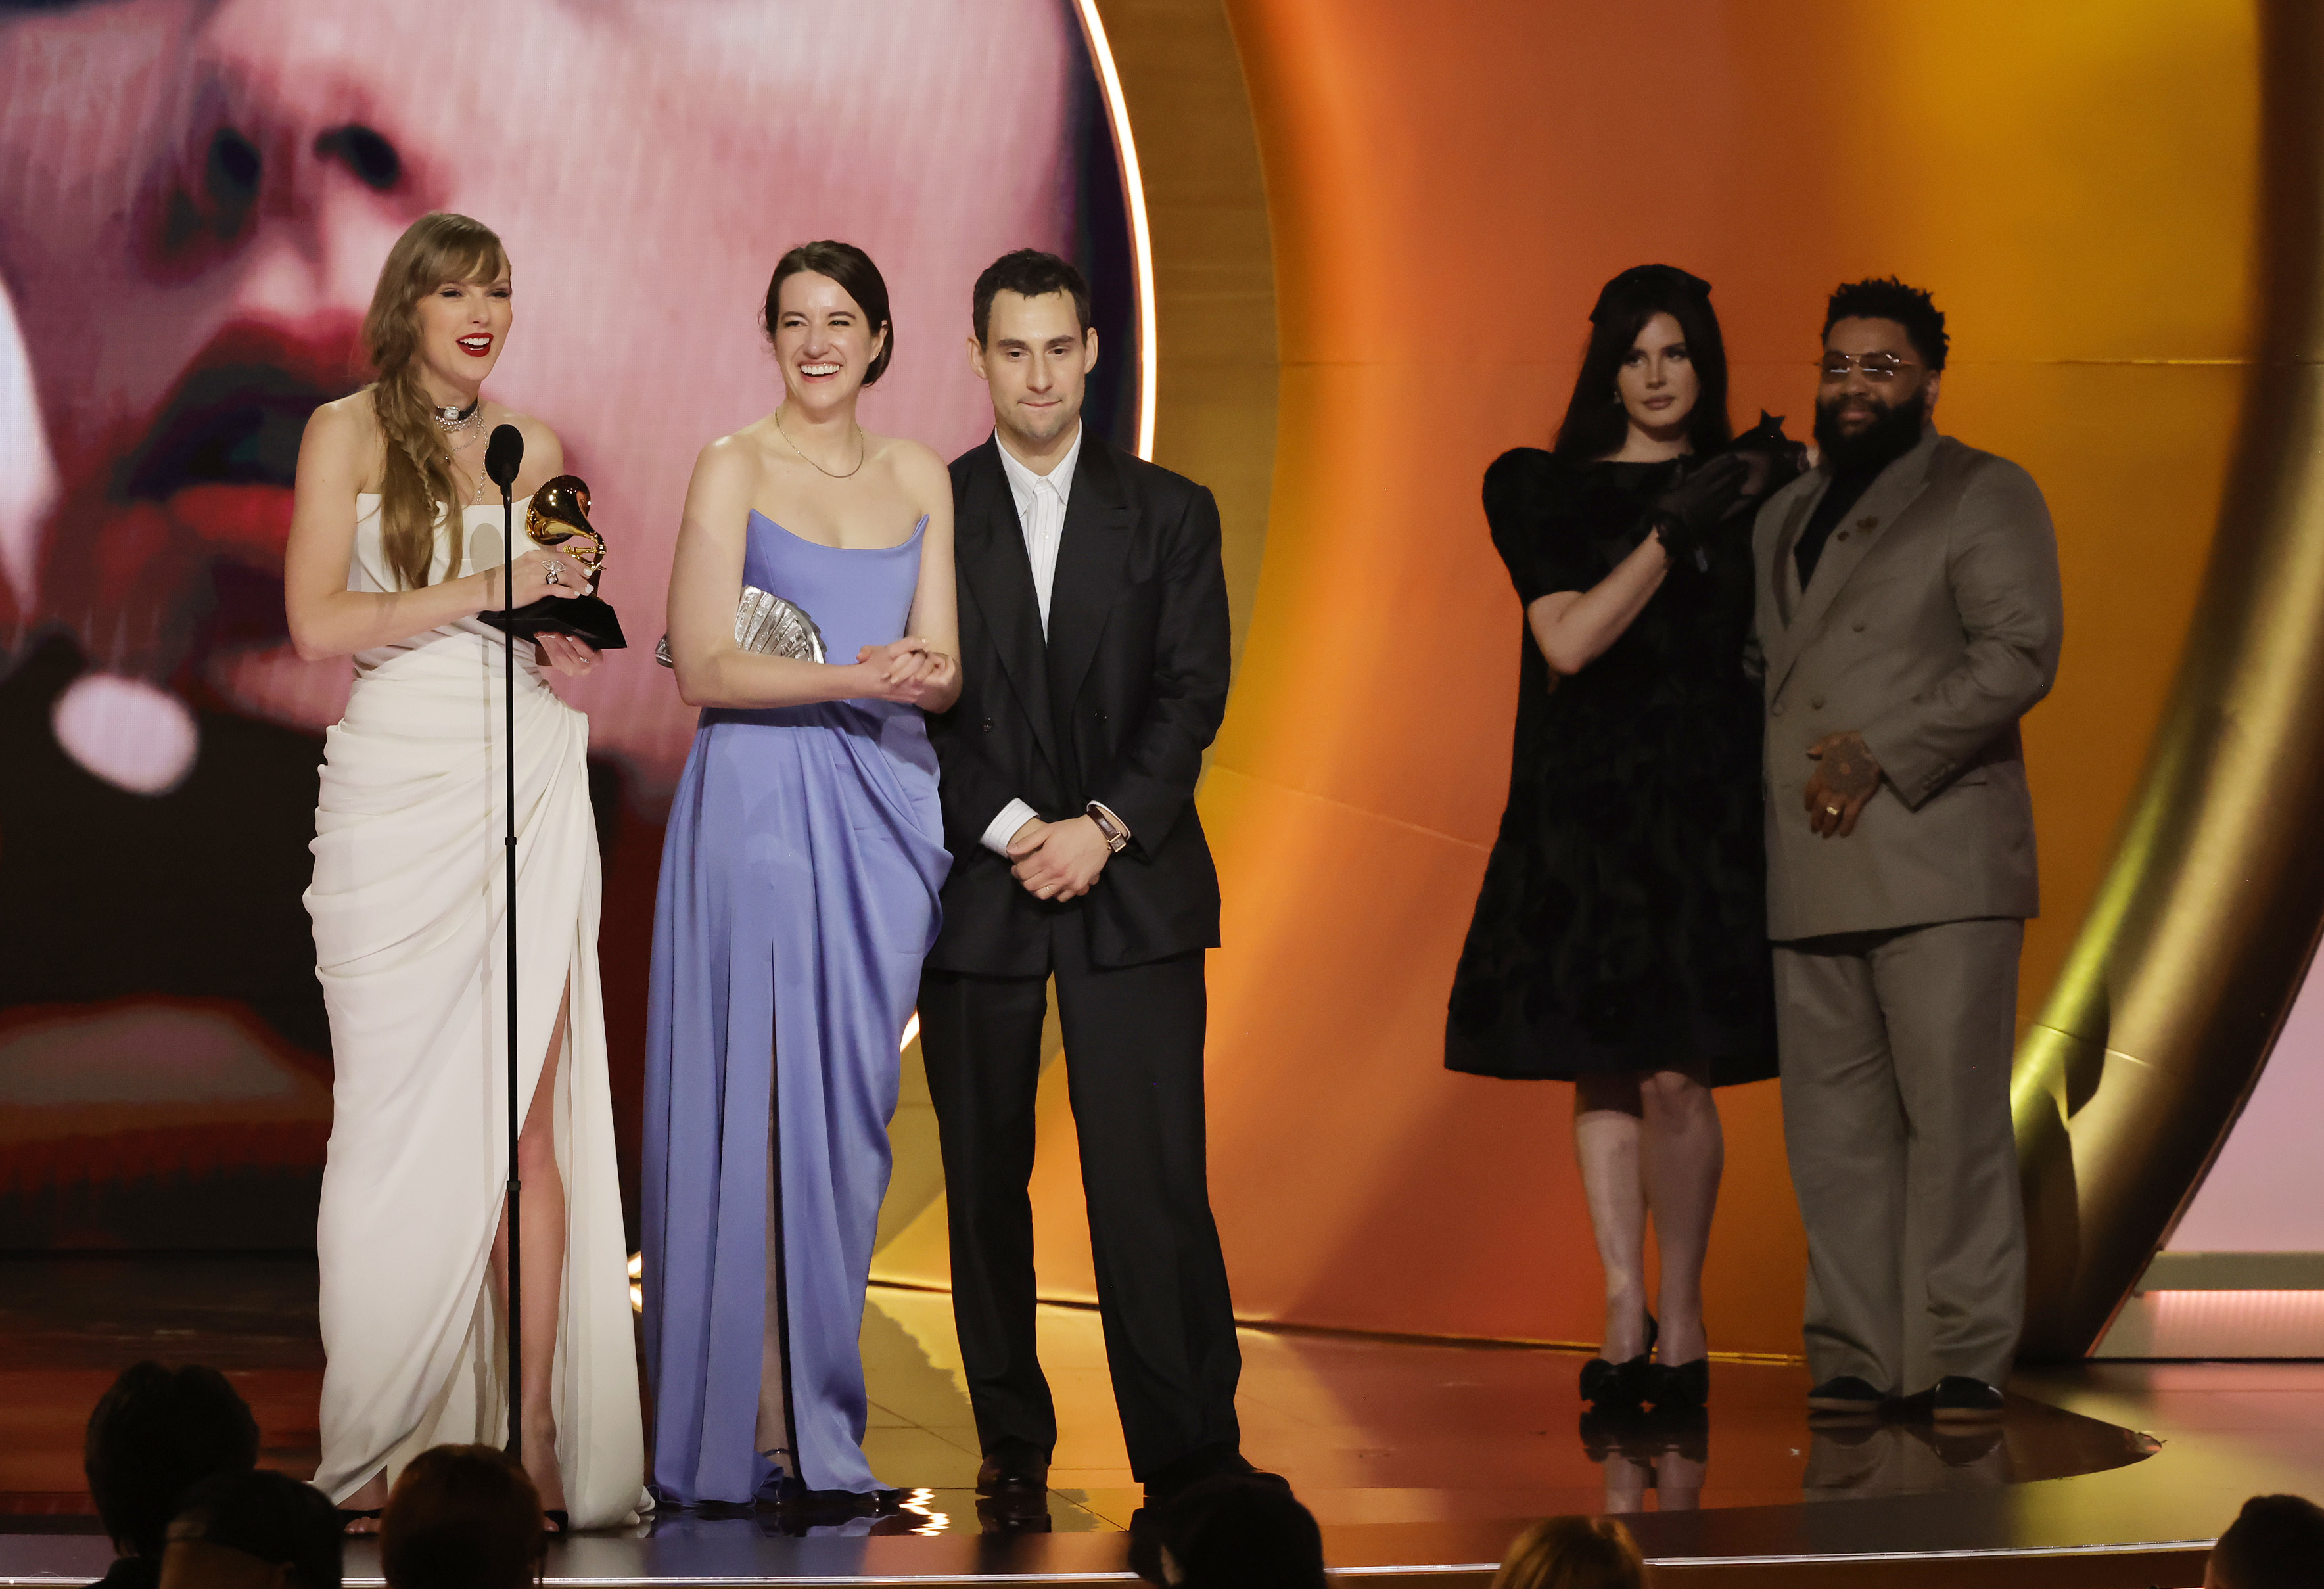 Close-up of Taylor onstage holding a Grammy, with Lana and others behind her